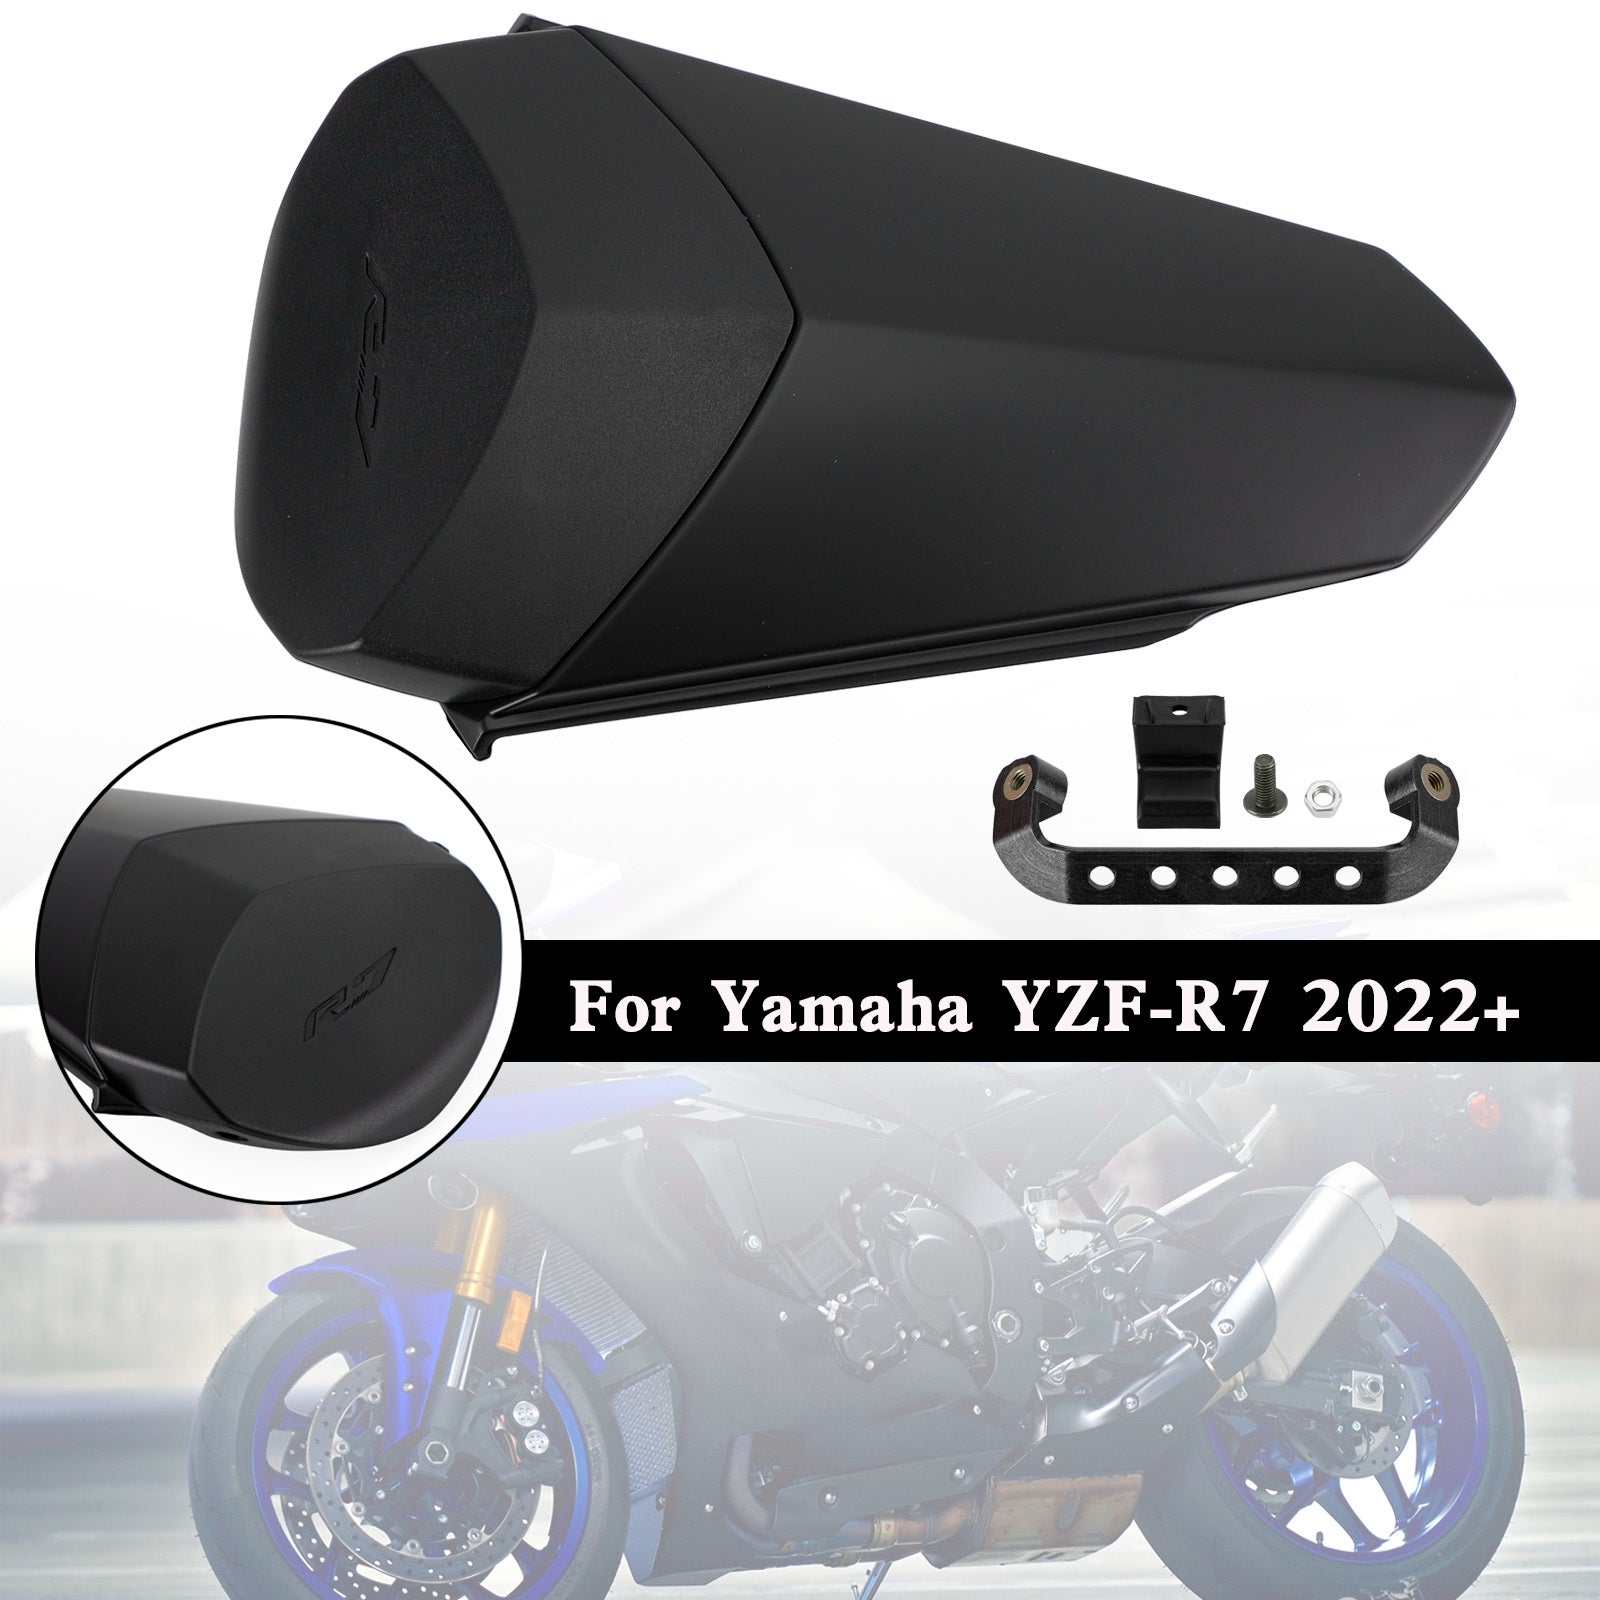 2022-2023 YAMAHA YZF-R7 YZF R7 Staart Achterbank Cover Kuip Cowl